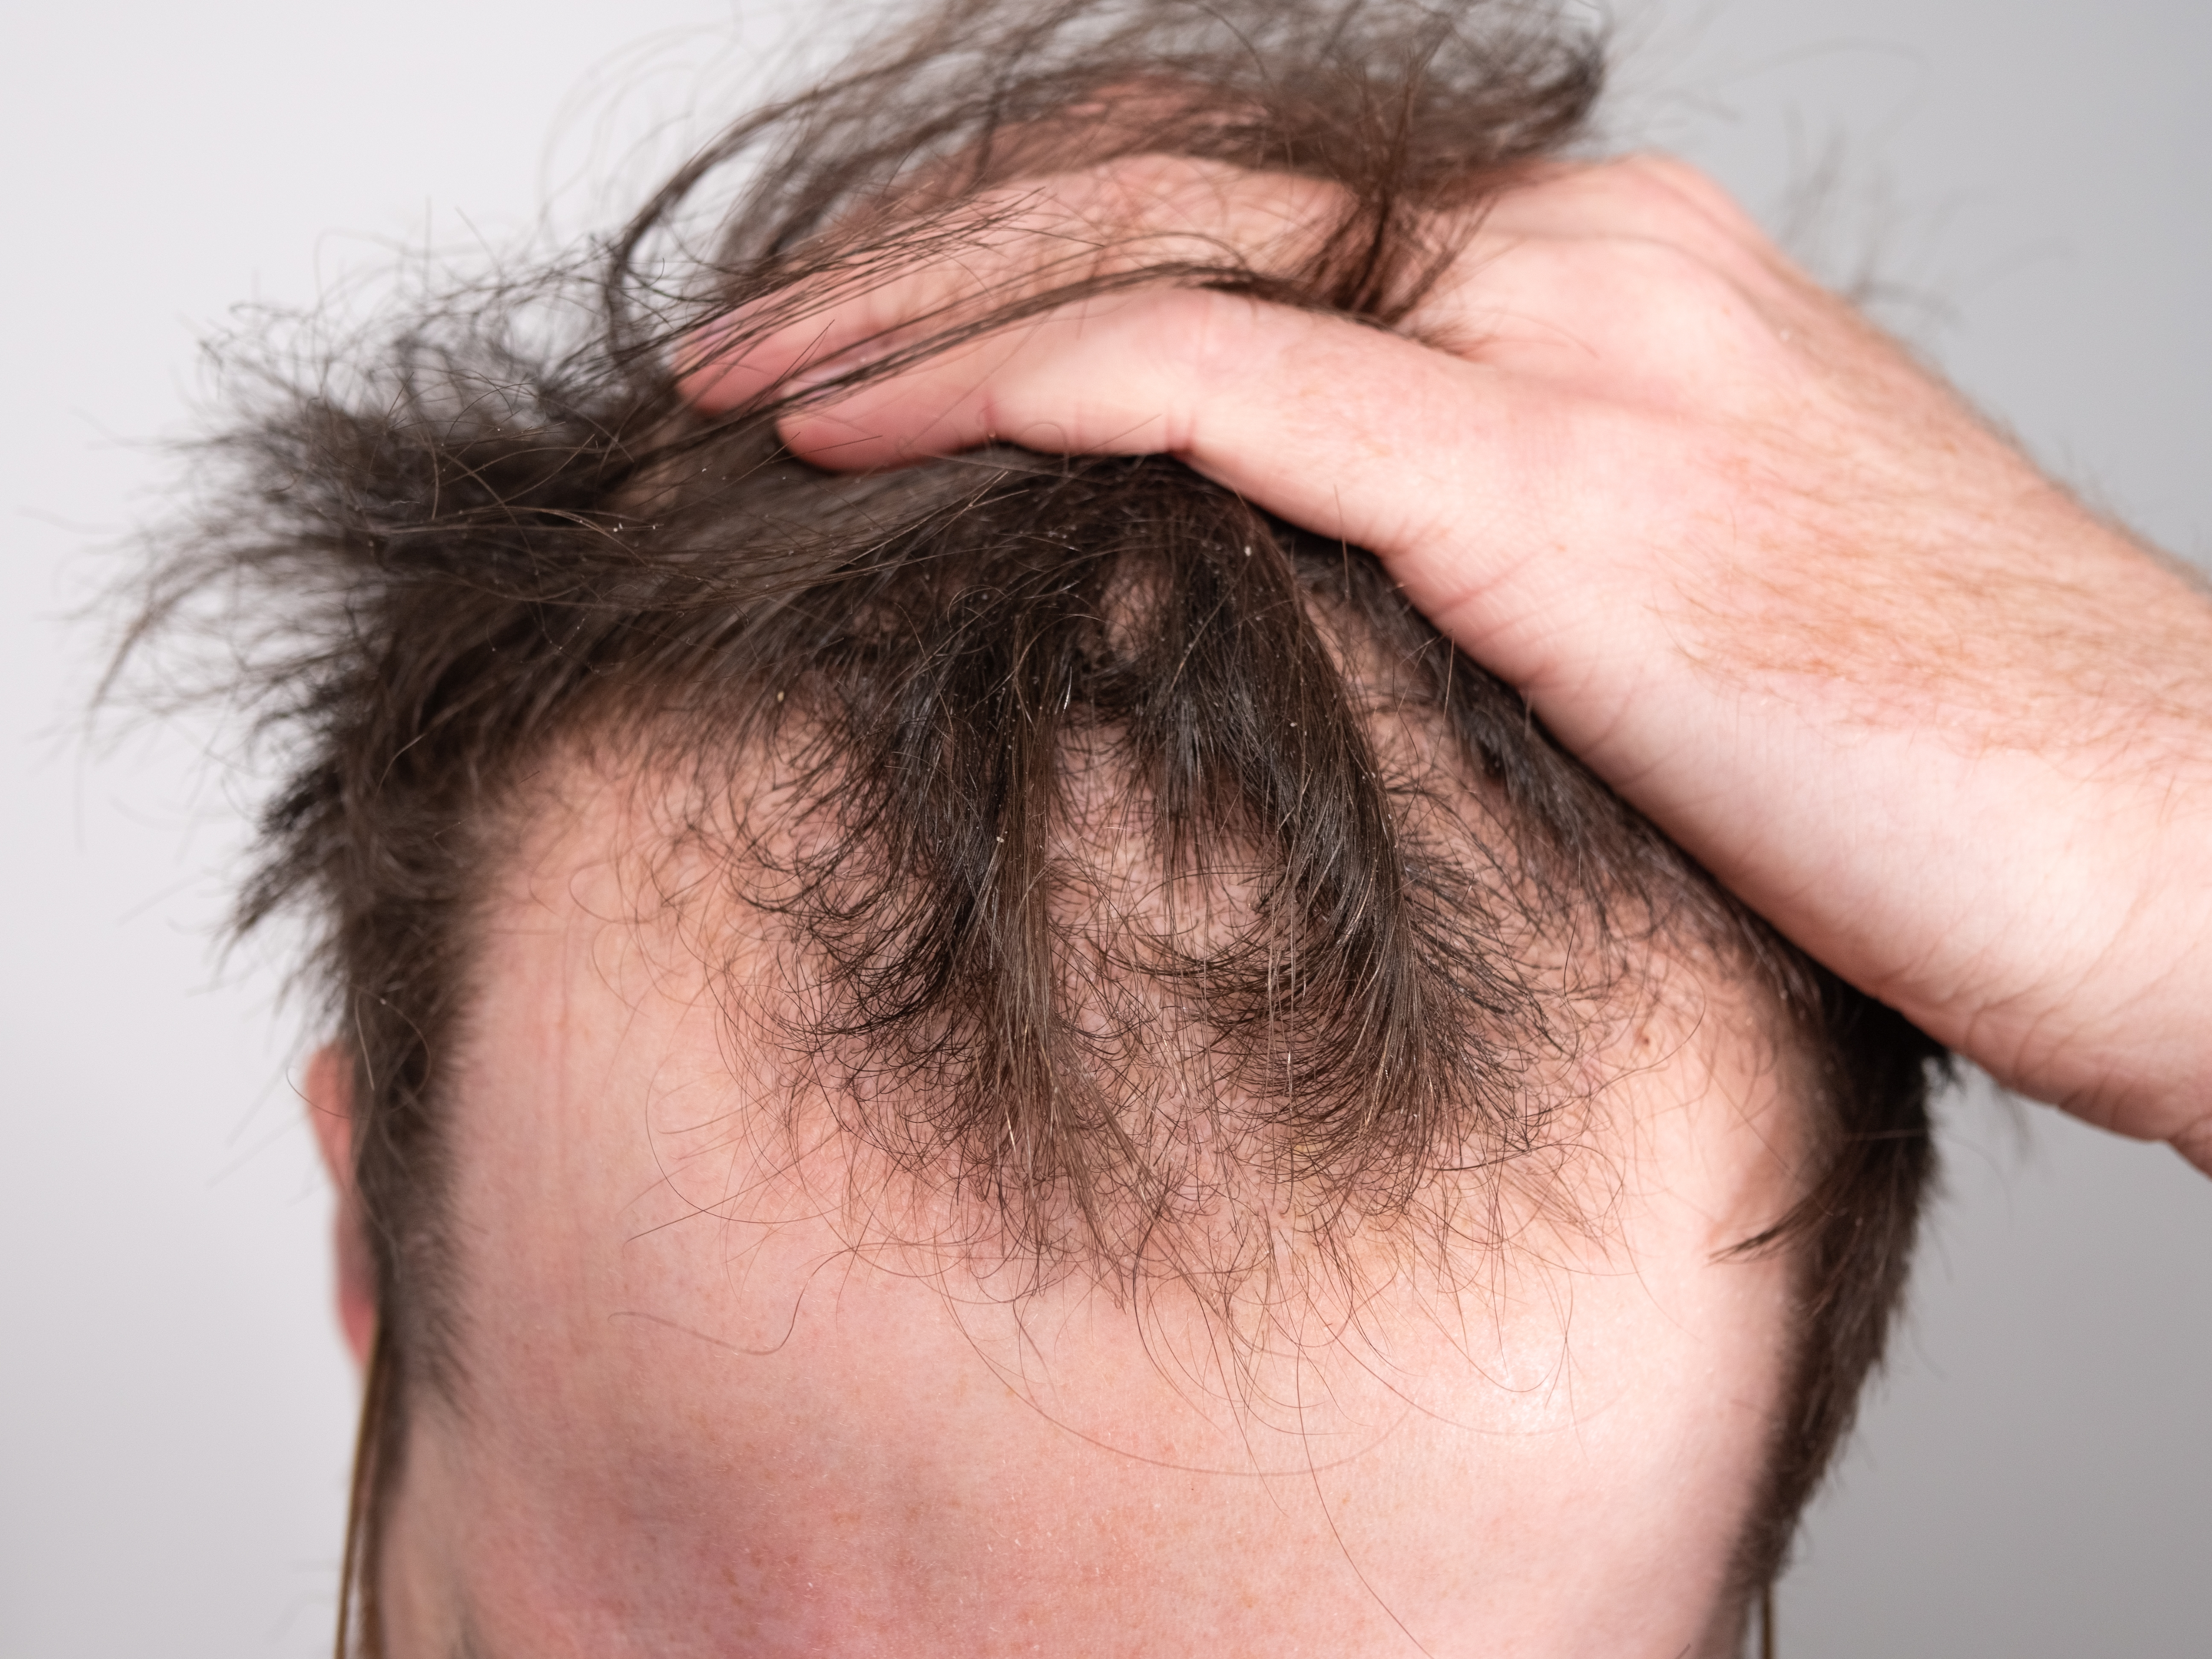 A man with a receding hairline and signs of male pattern baldness